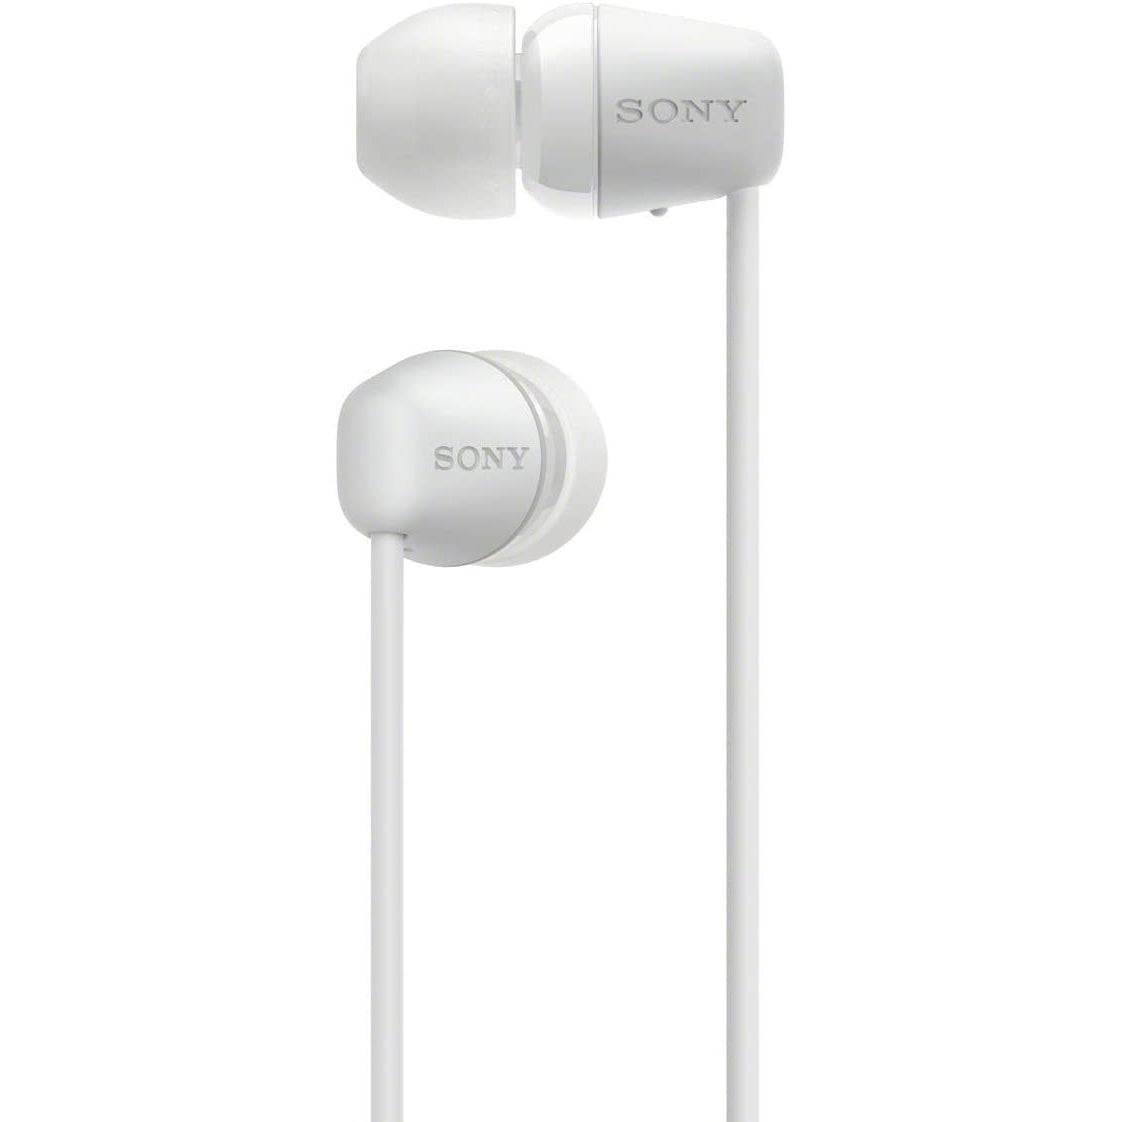 Sony WI-C200 Wireless Bluetooth Headphones with Mic - White - Excellent